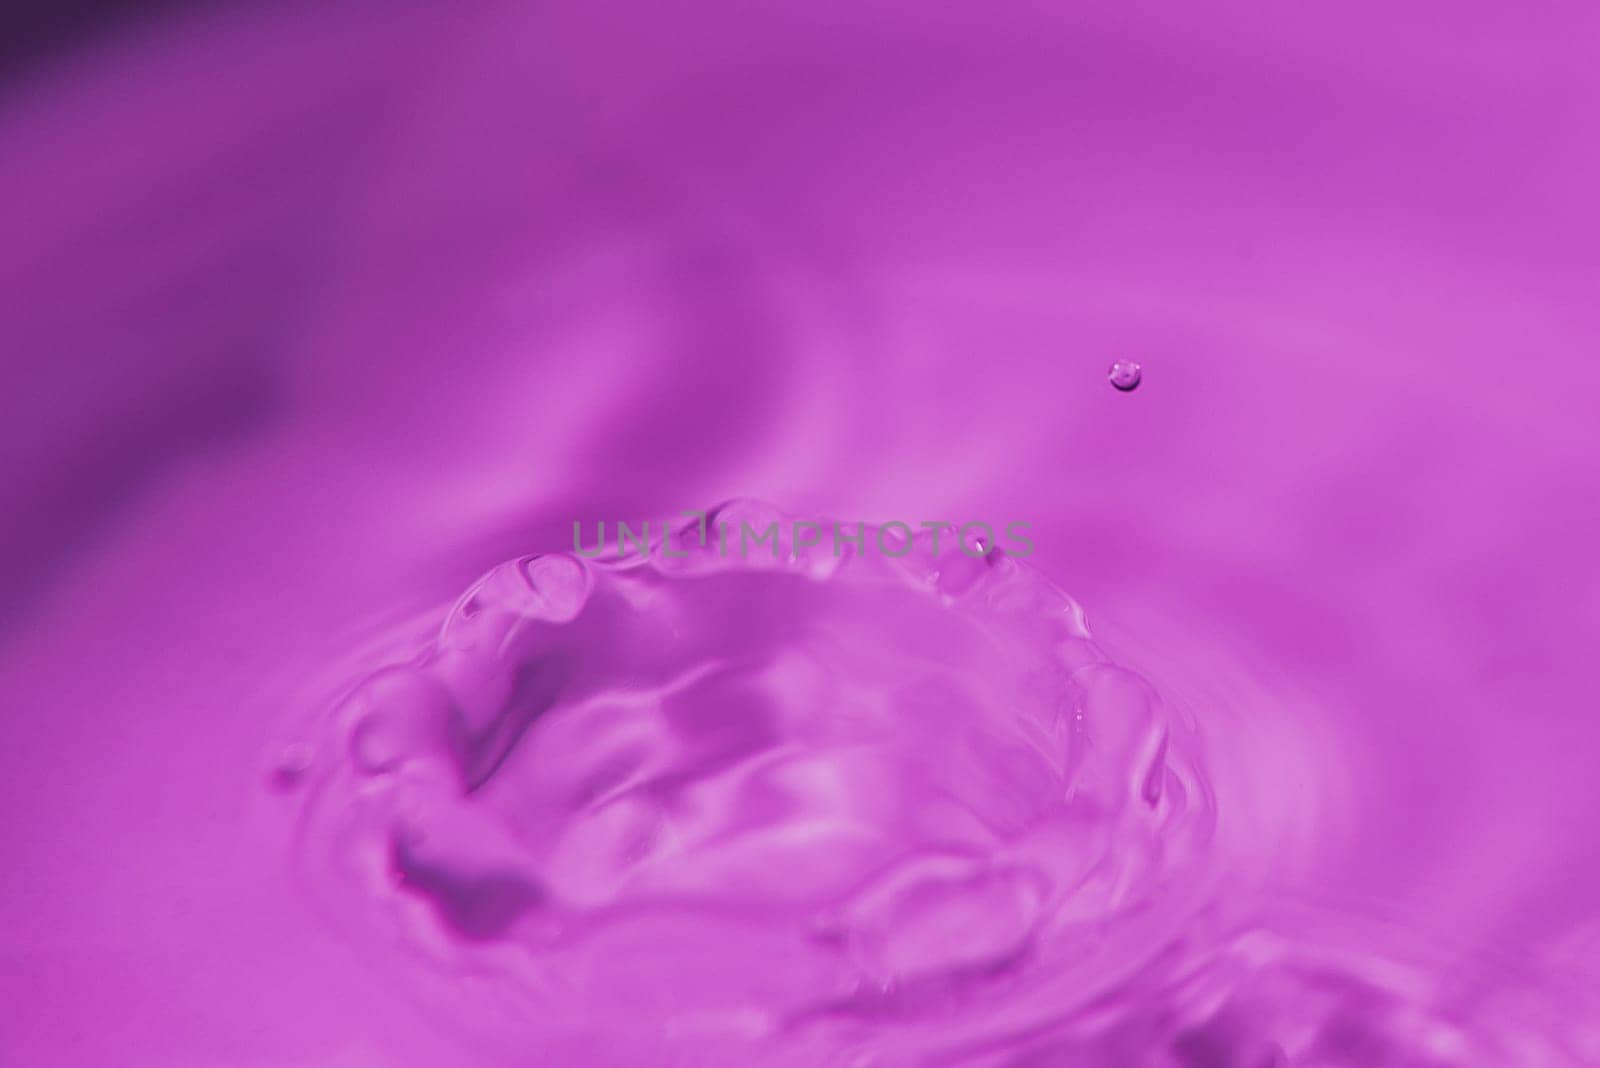 099.One or more drops of water splashing into waves and undefined shapes. Wallpaper by raul_ruiz